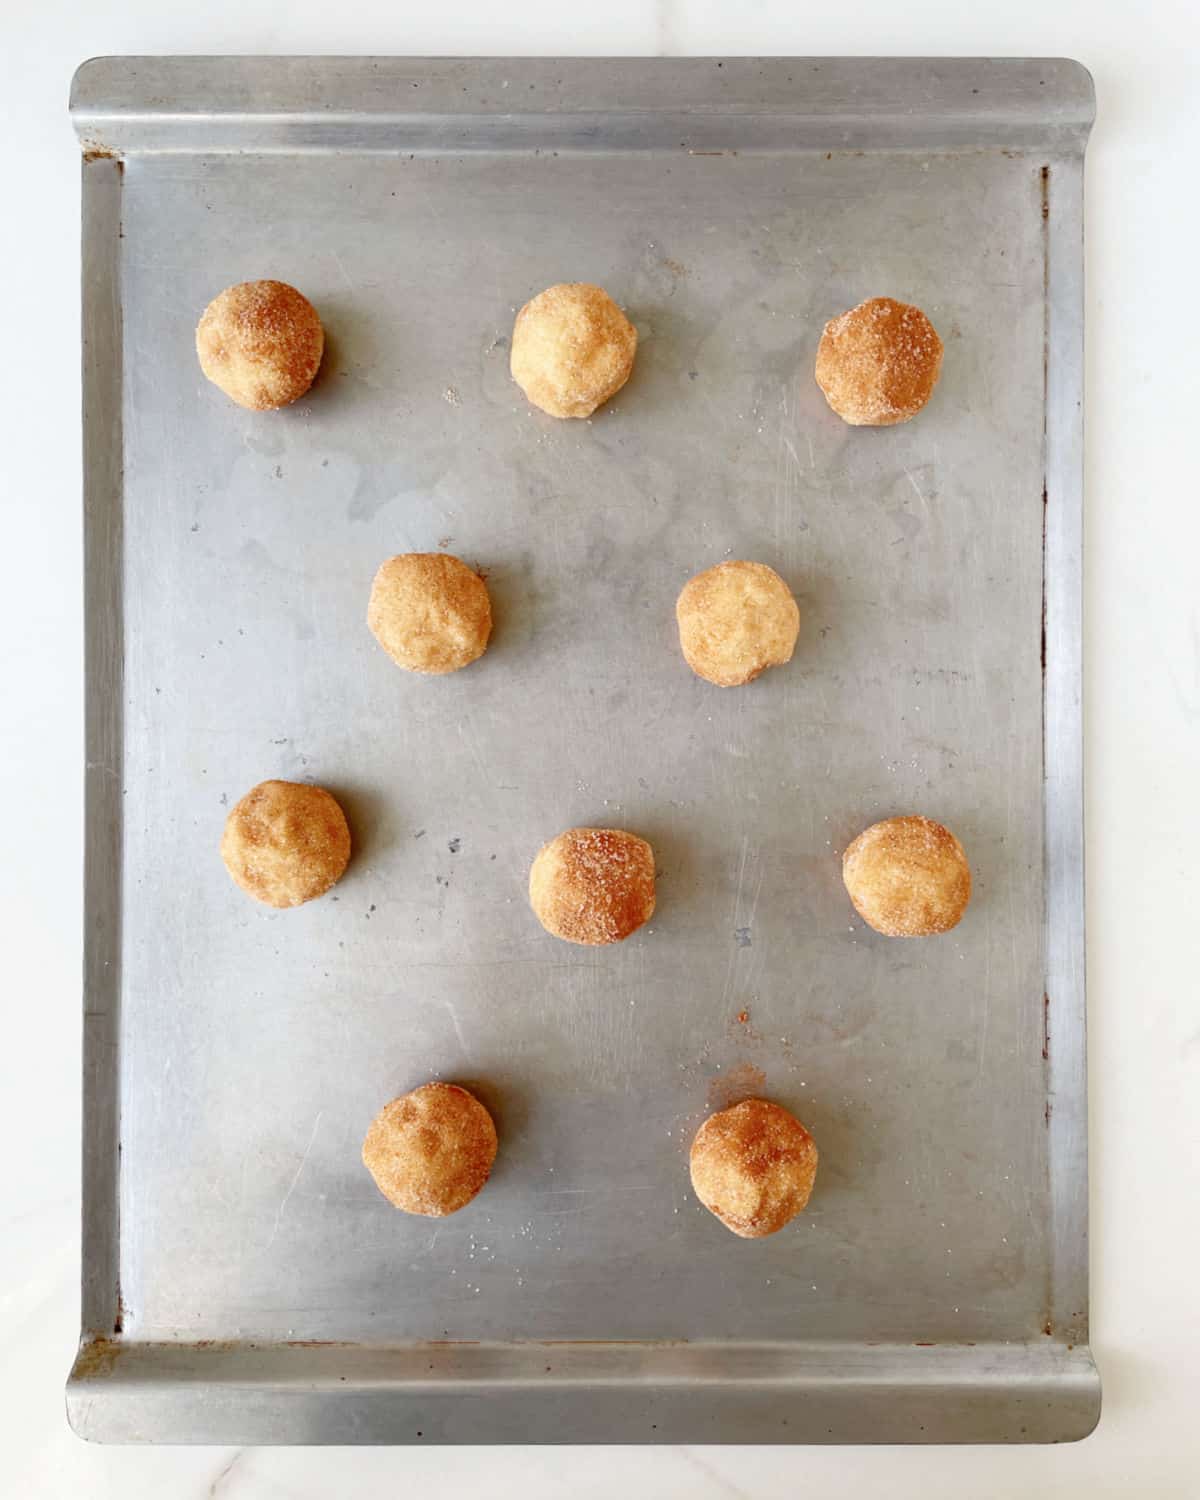 Metal pan with raw balls of snickerdoodle cookies. View from above.